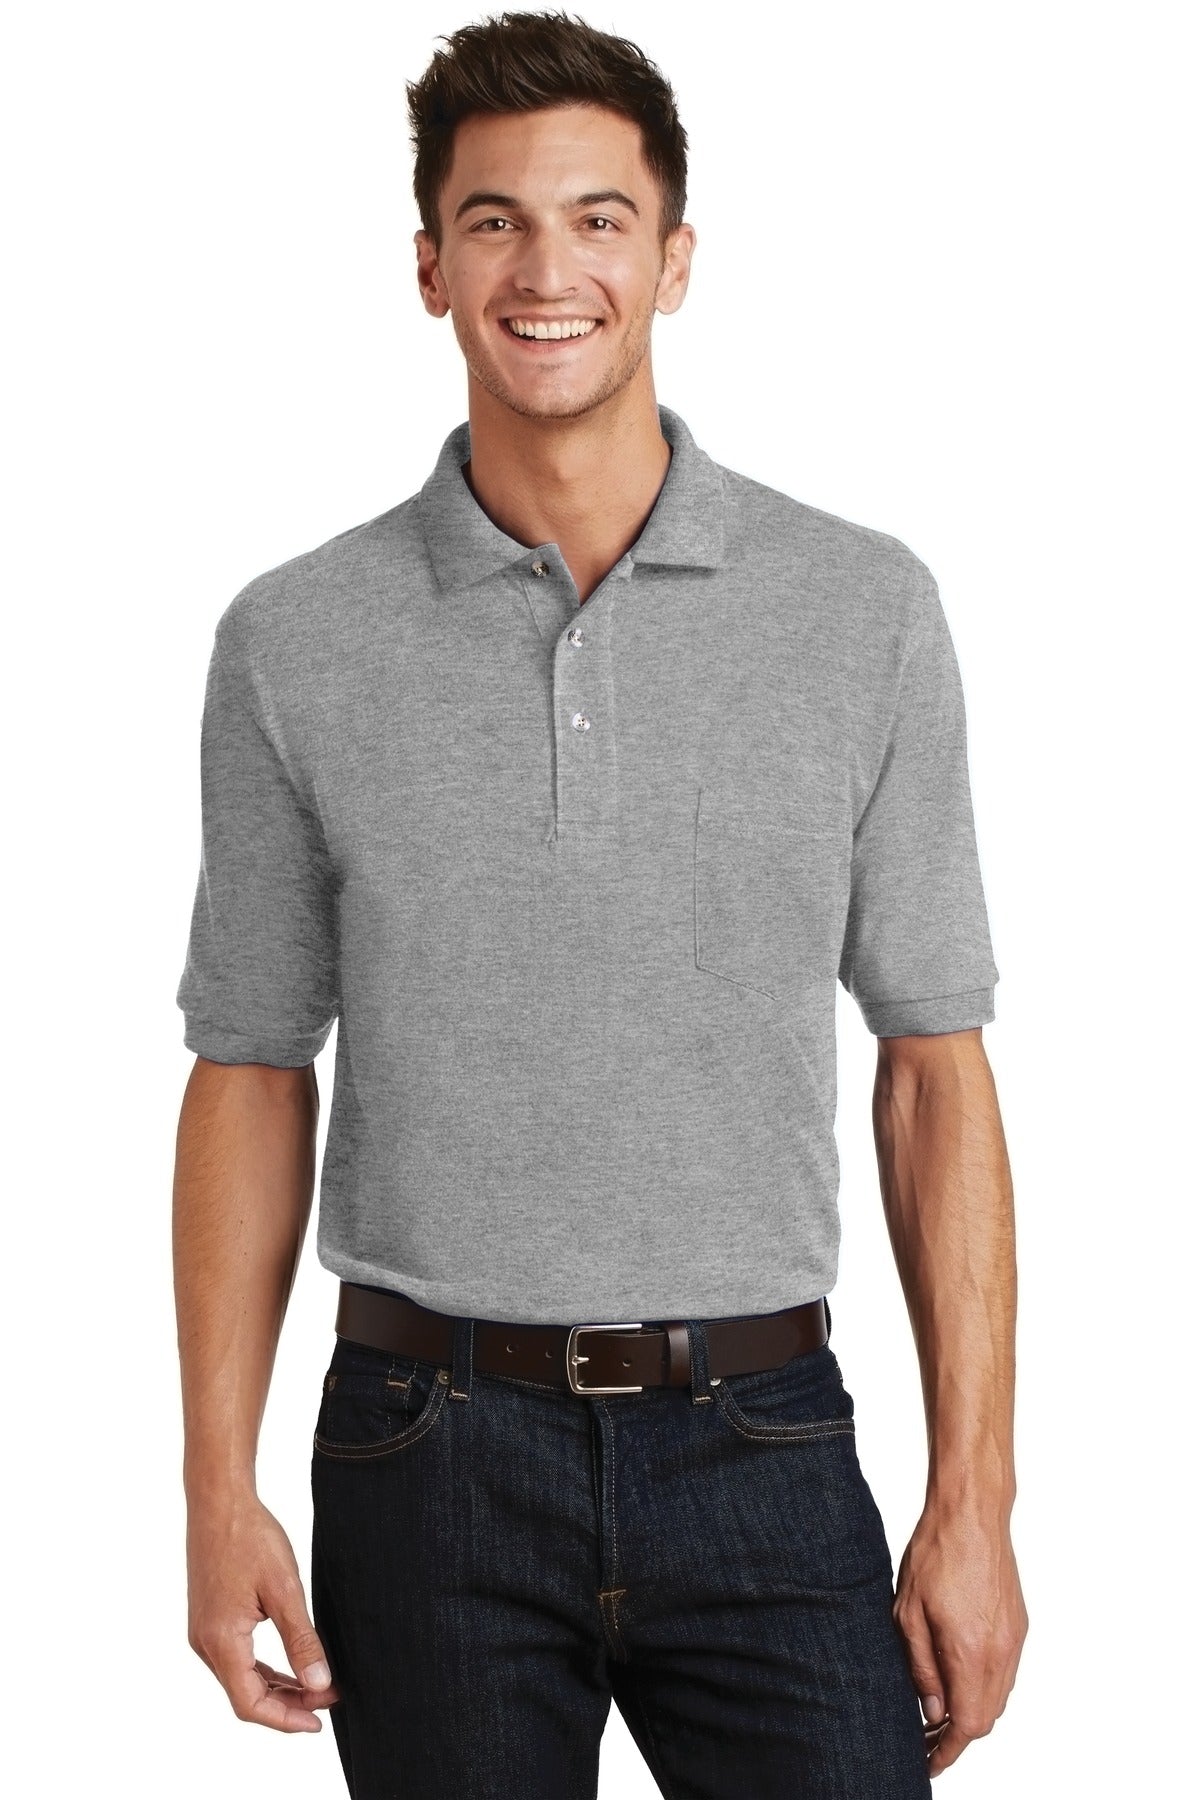 Port Authority¬Æ Heavyweight Cotton Pique Polo with Pocket.  K420P